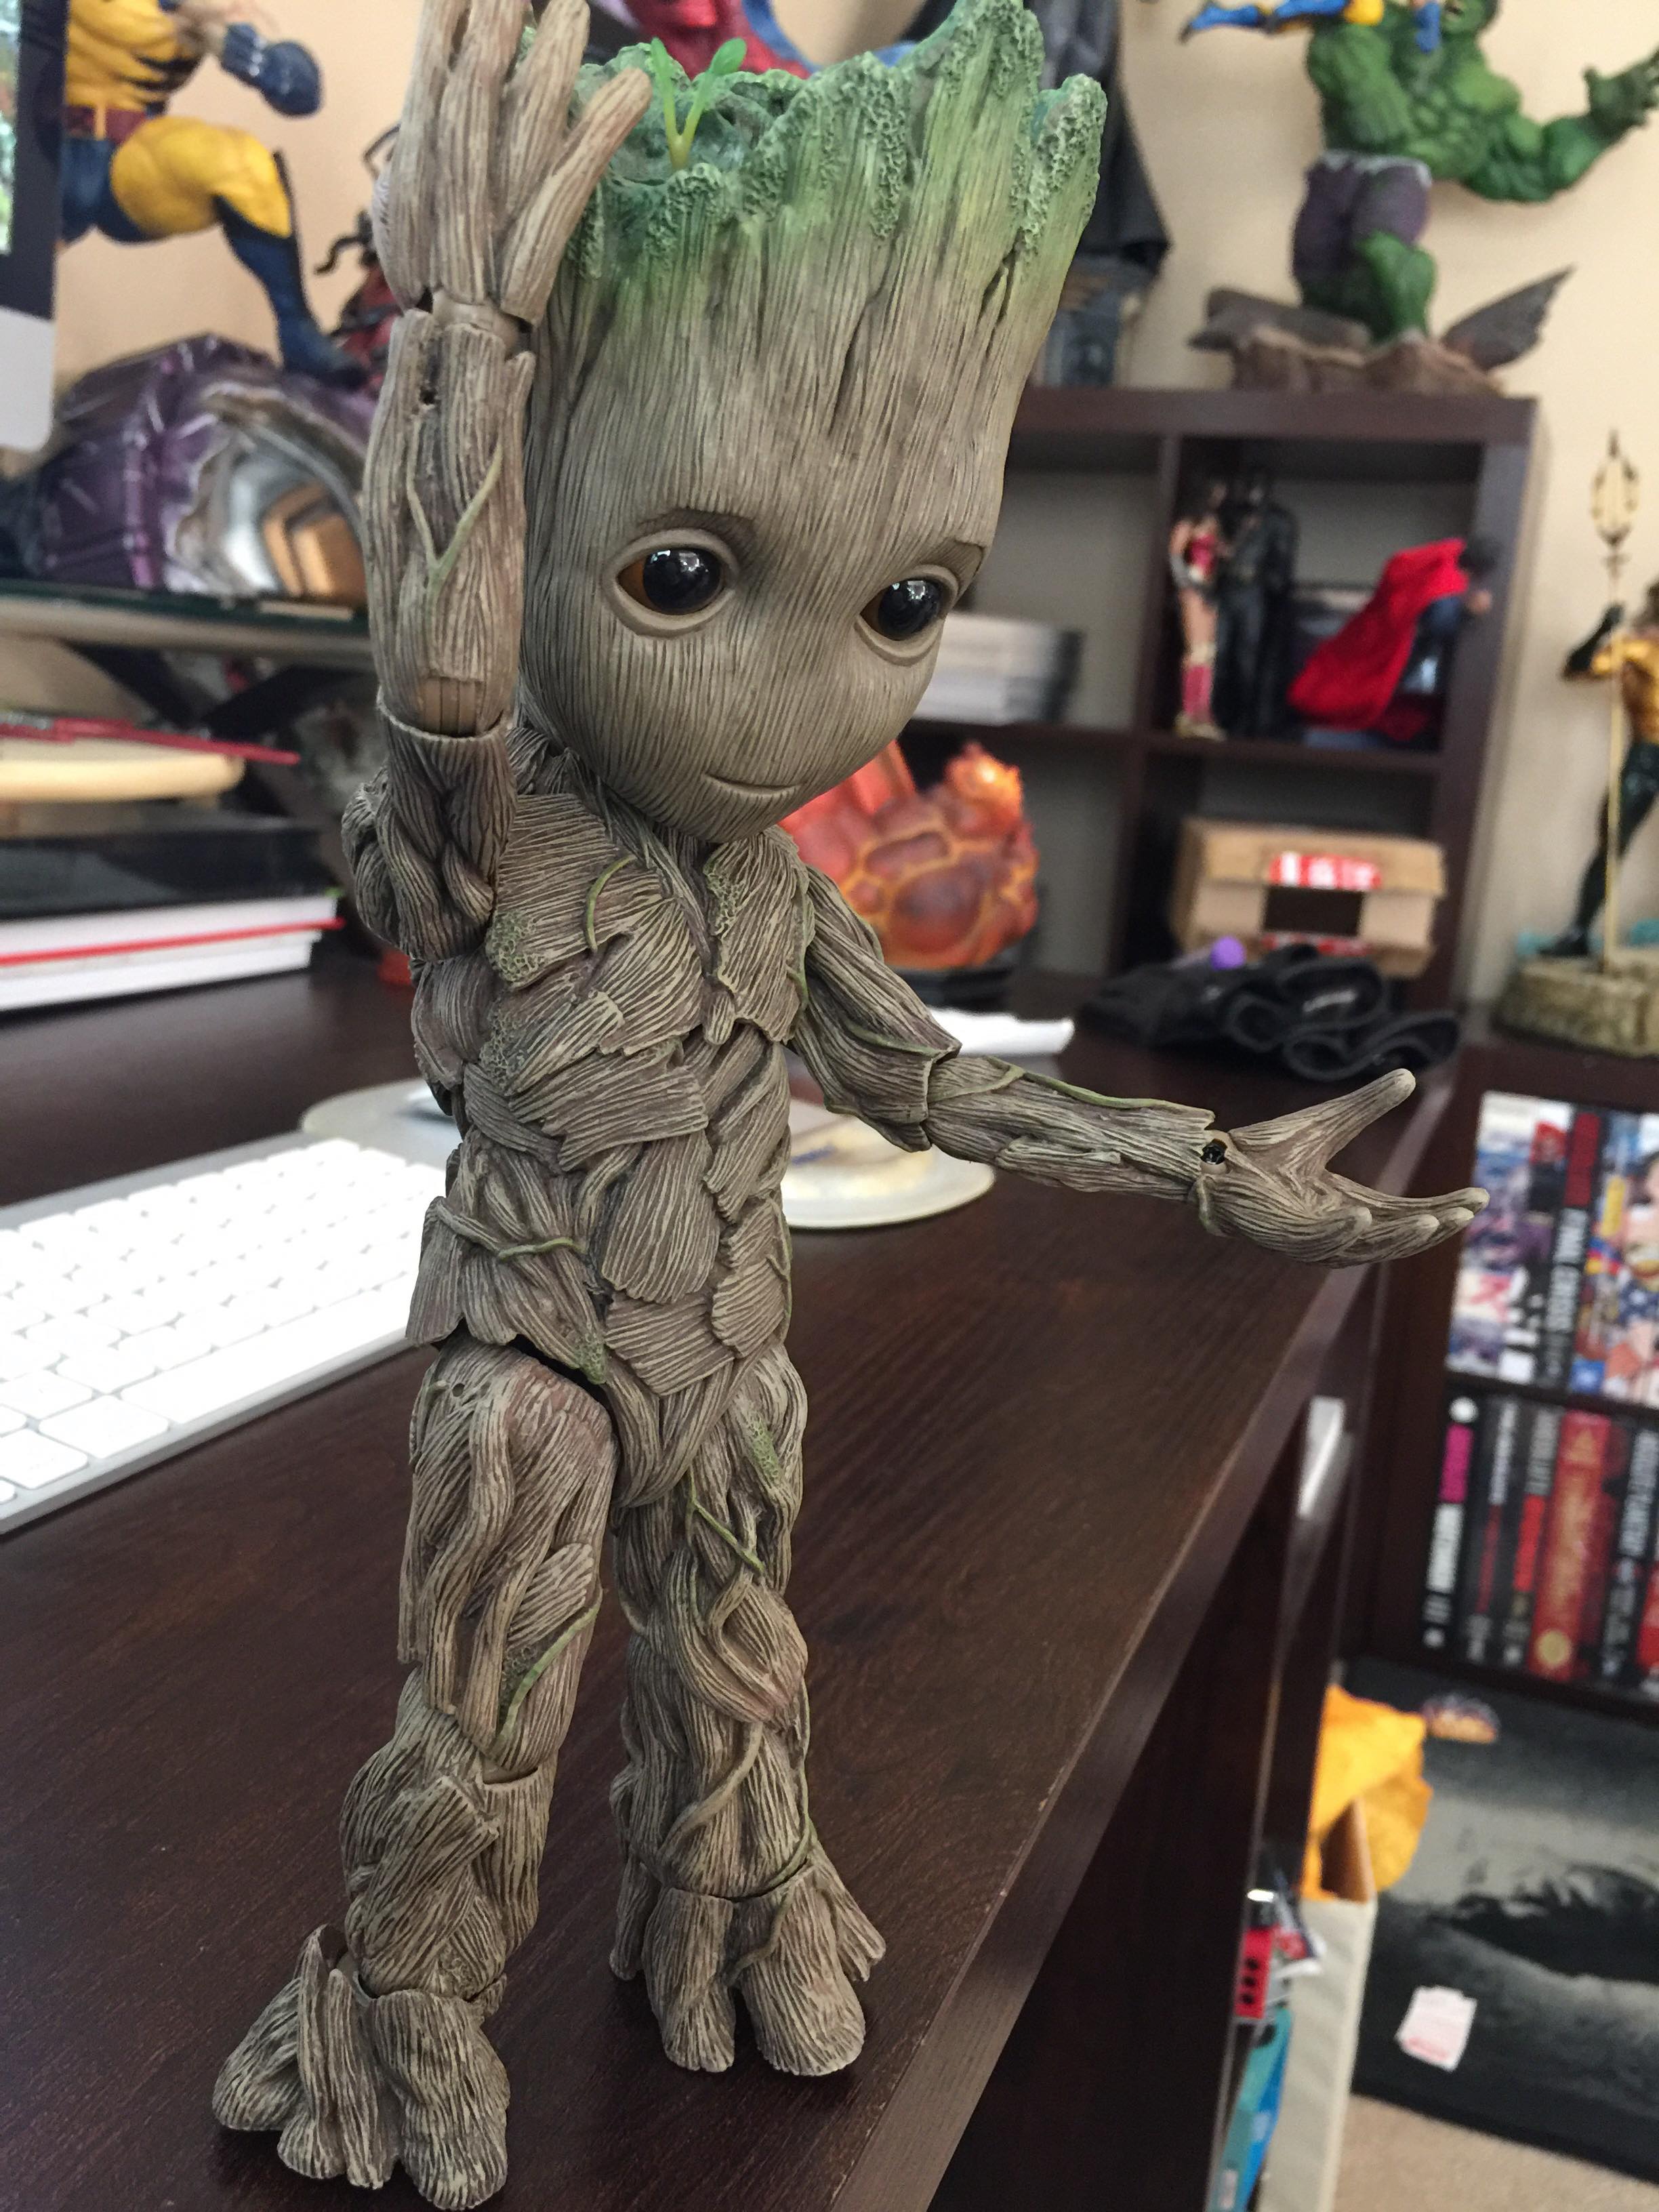 hot toys groot life size